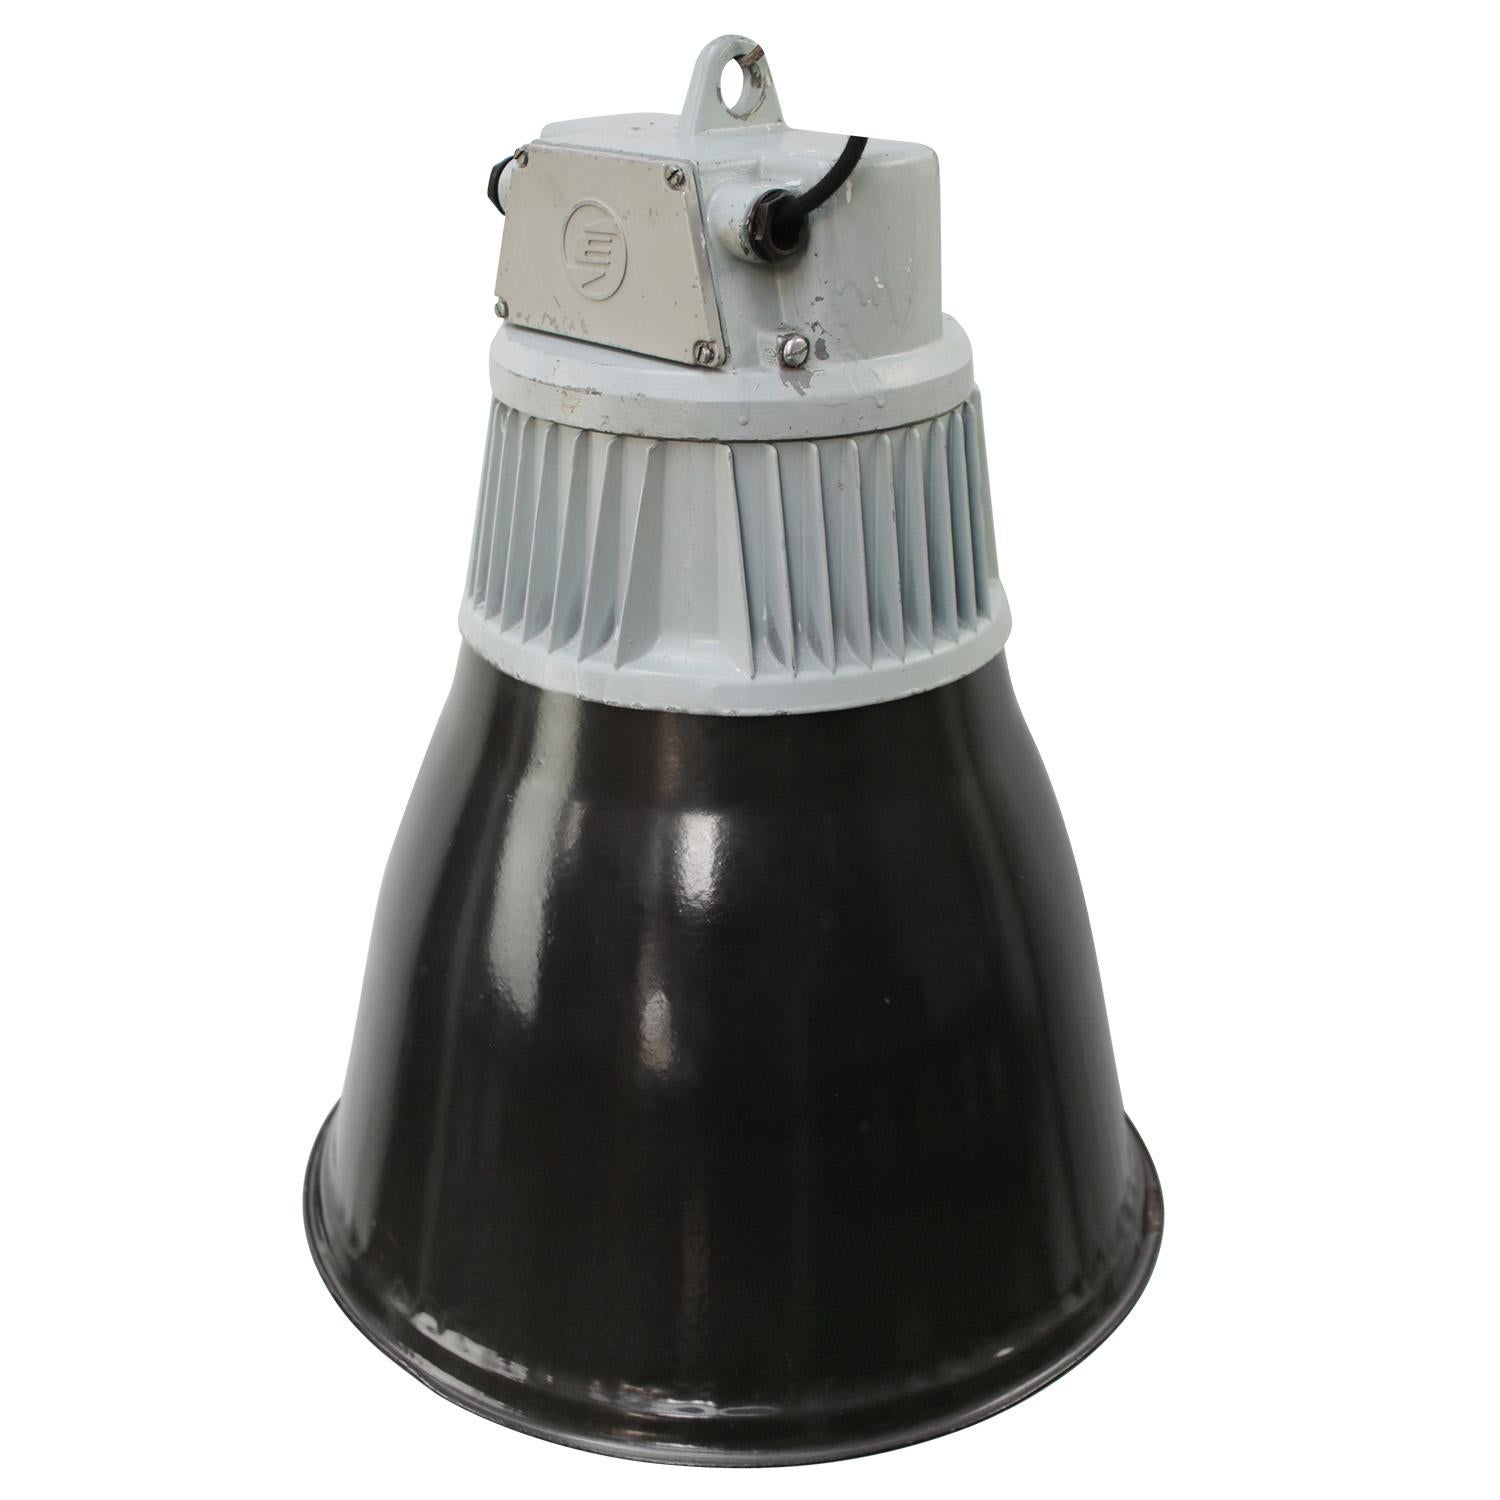 Industrial hanging lamp. 
Black enamel shade with gray cast aluminum top.

Weight: 5.0 kg / 11 lb

Priced per individual item. All lamps have been made suitable by international standards for incandescent light bulbs, energy-efficient and LED bulbs.